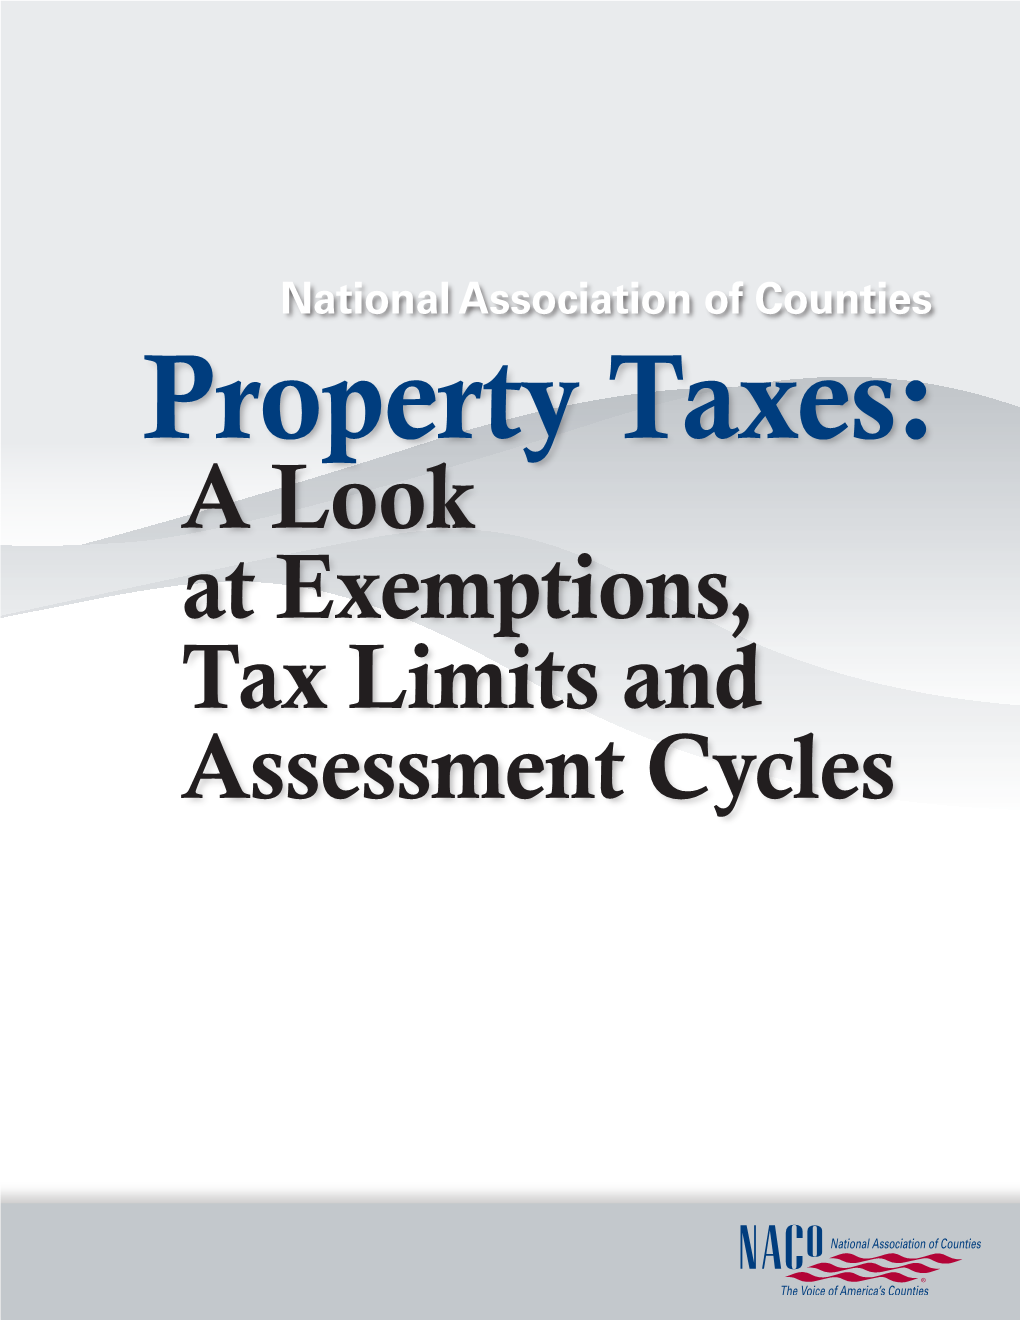 A Look at Exemptions, Tax Limits and Assessment Cycles Property Taxes: a Look at Exemptions, Tax Limits and Assessment Cycles